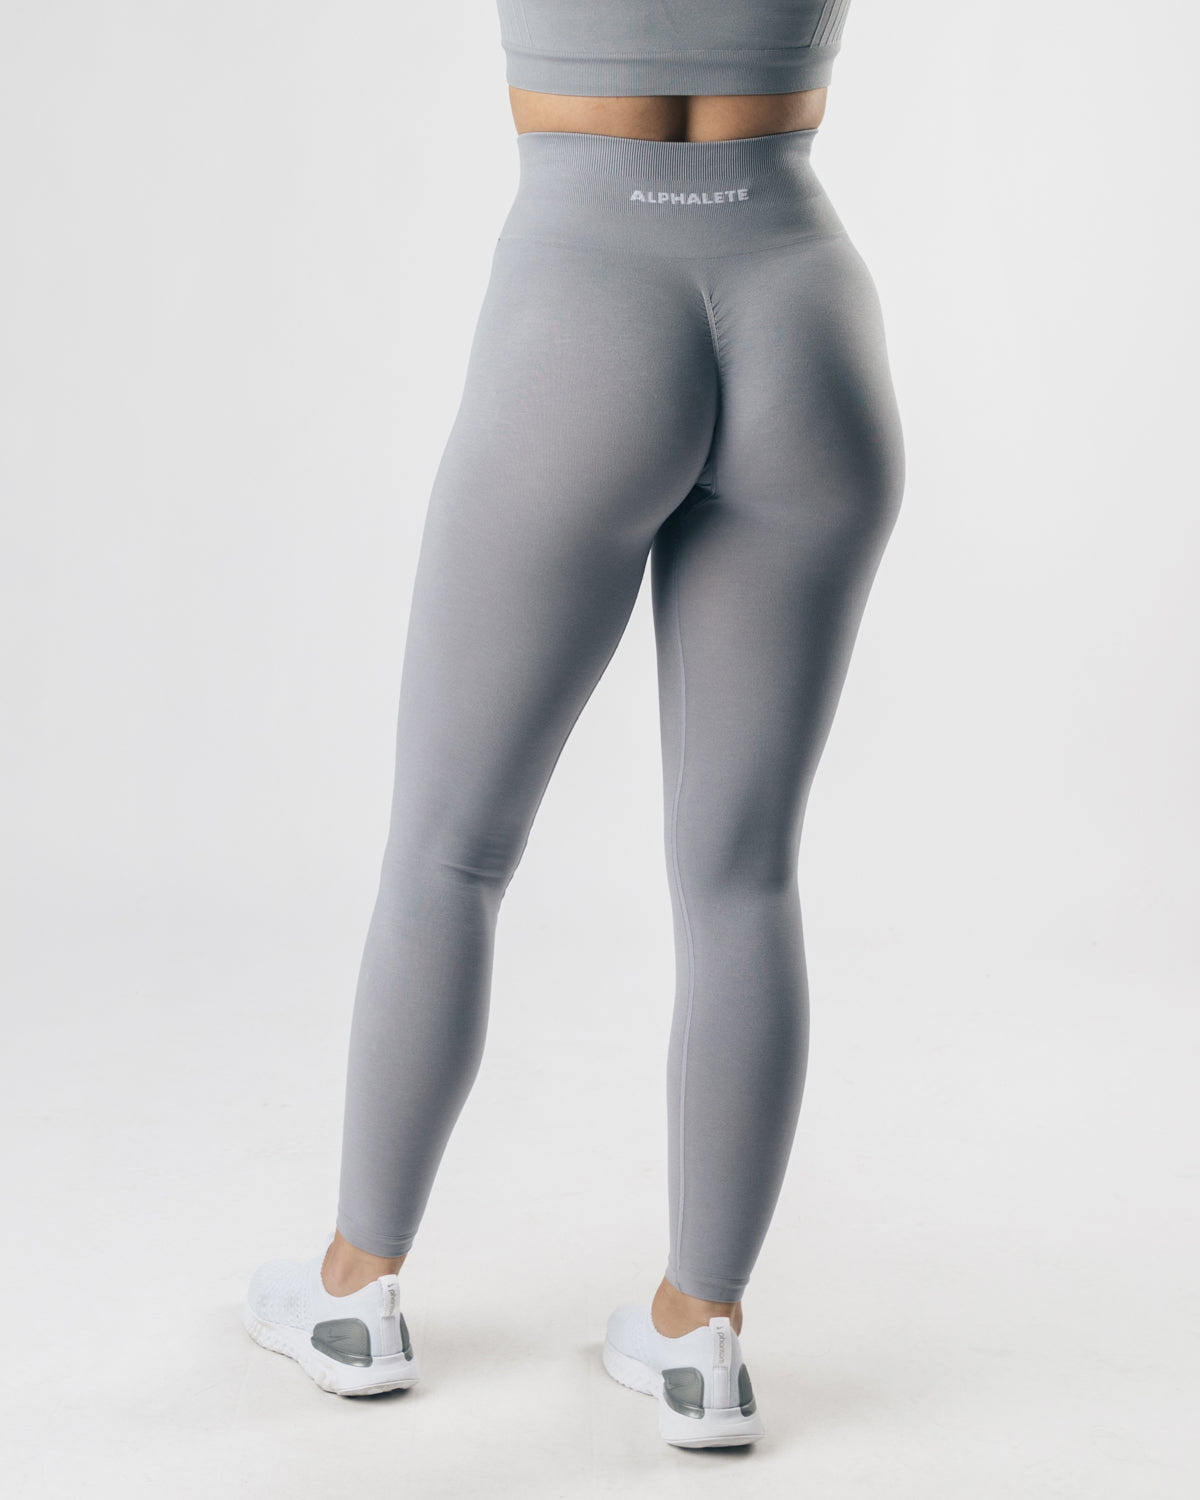 Alphalete Amplify Leggings Gray Size M - $47 (37% Off Retail) - From Karlee